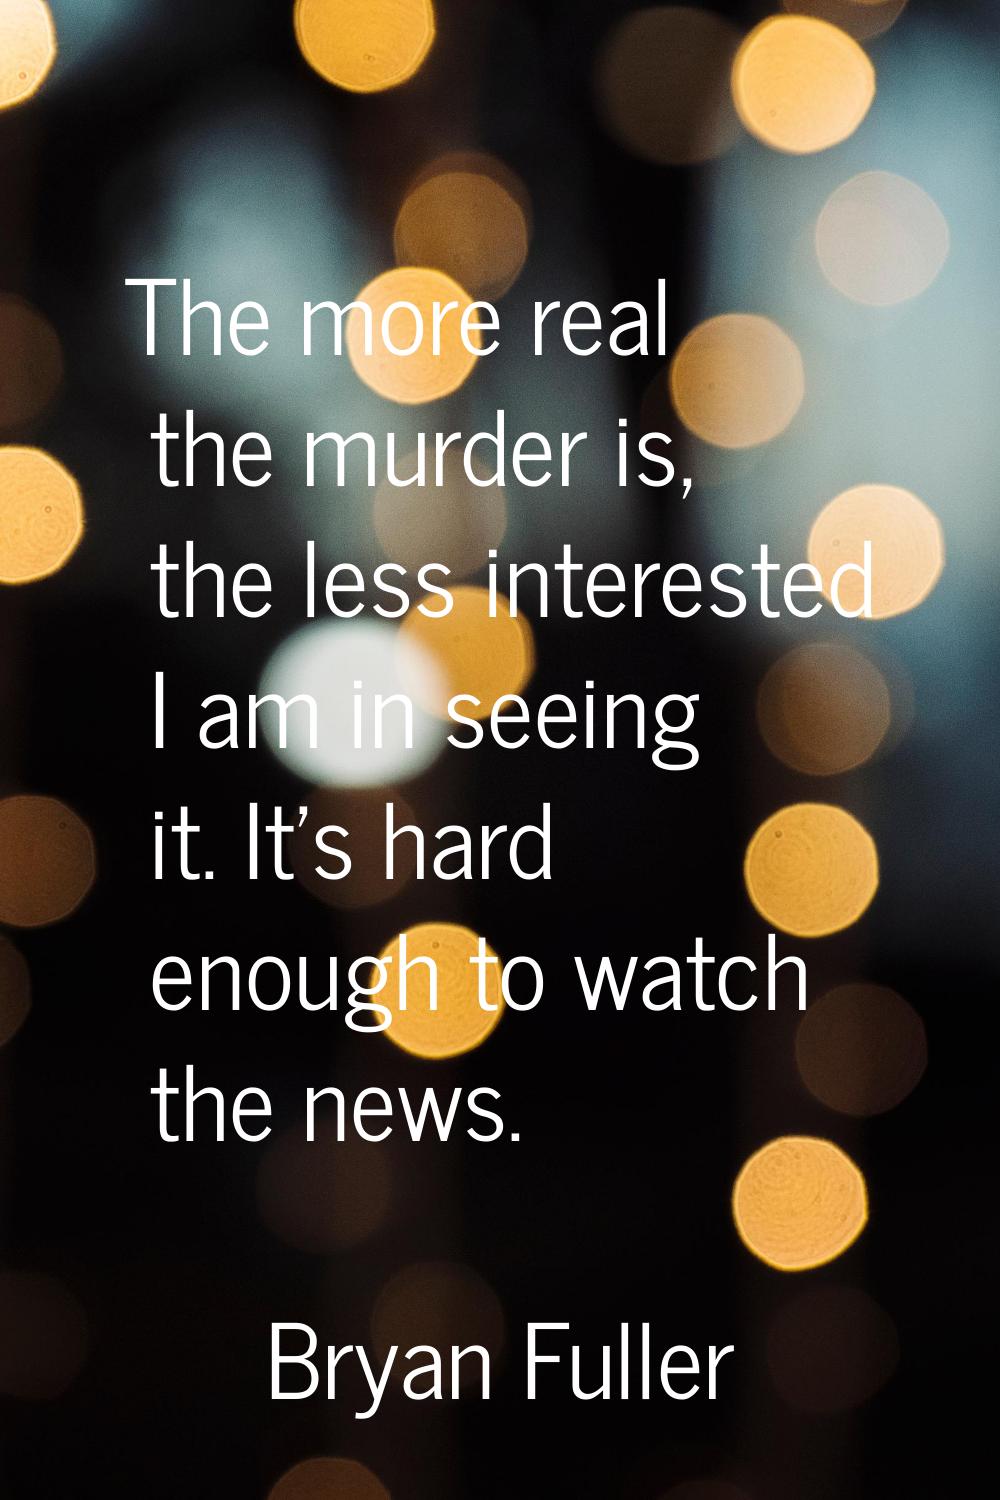 The more real the murder is, the less interested I am in seeing it. It's hard enough to watch the n